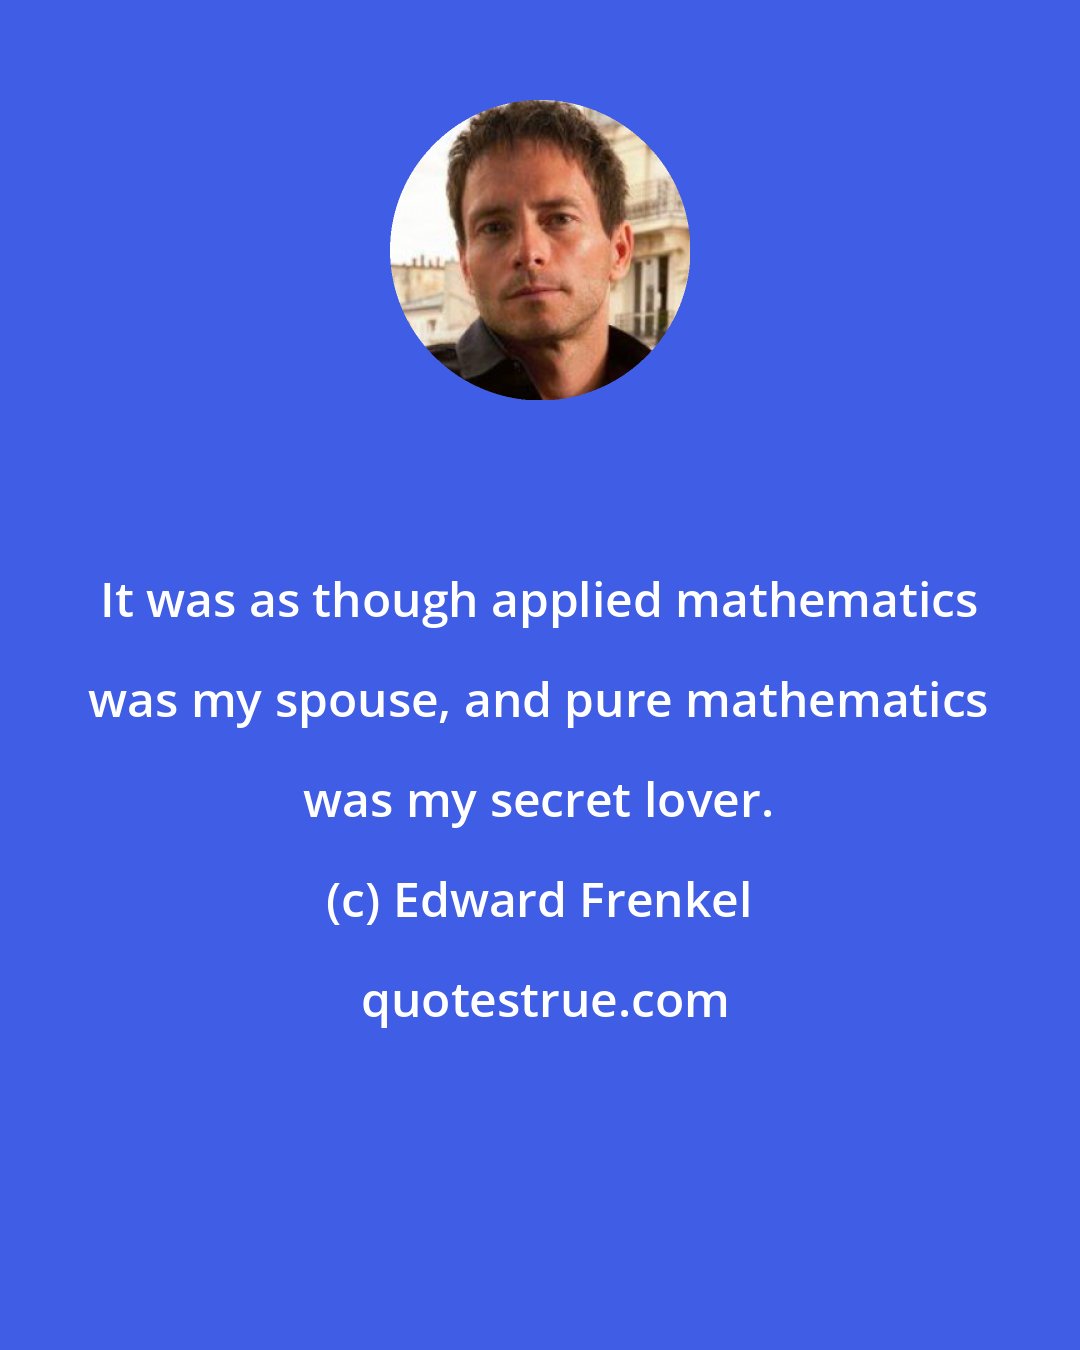 Edward Frenkel: It was as though applied mathematics was my spouse, and pure mathematics was my secret lover.